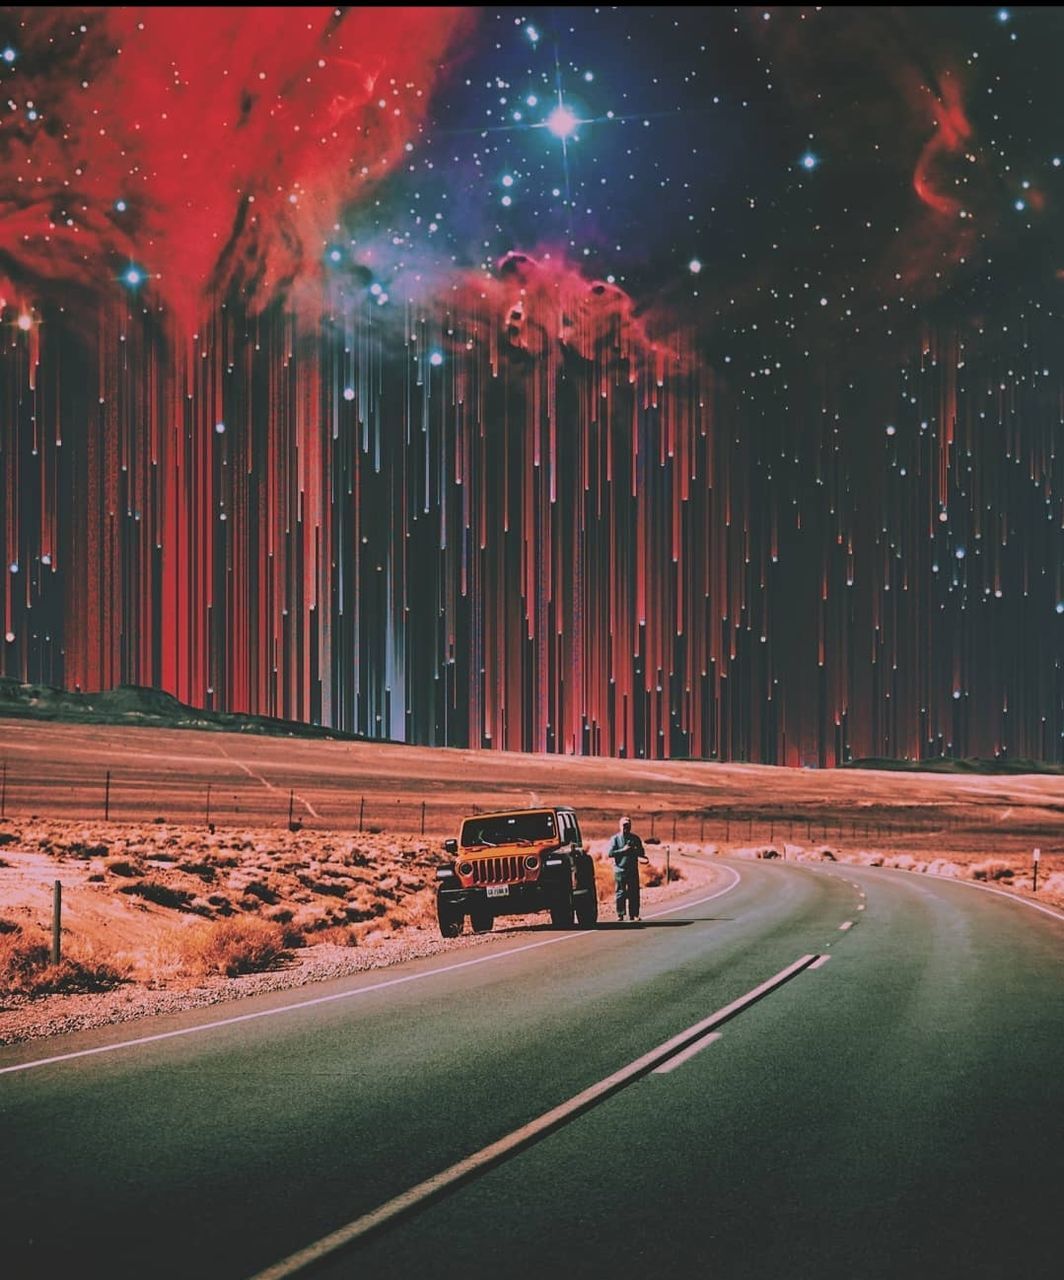 DIGITAL COMPOSITE IMAGE OF PEOPLE ON ROAD AT NIGHT